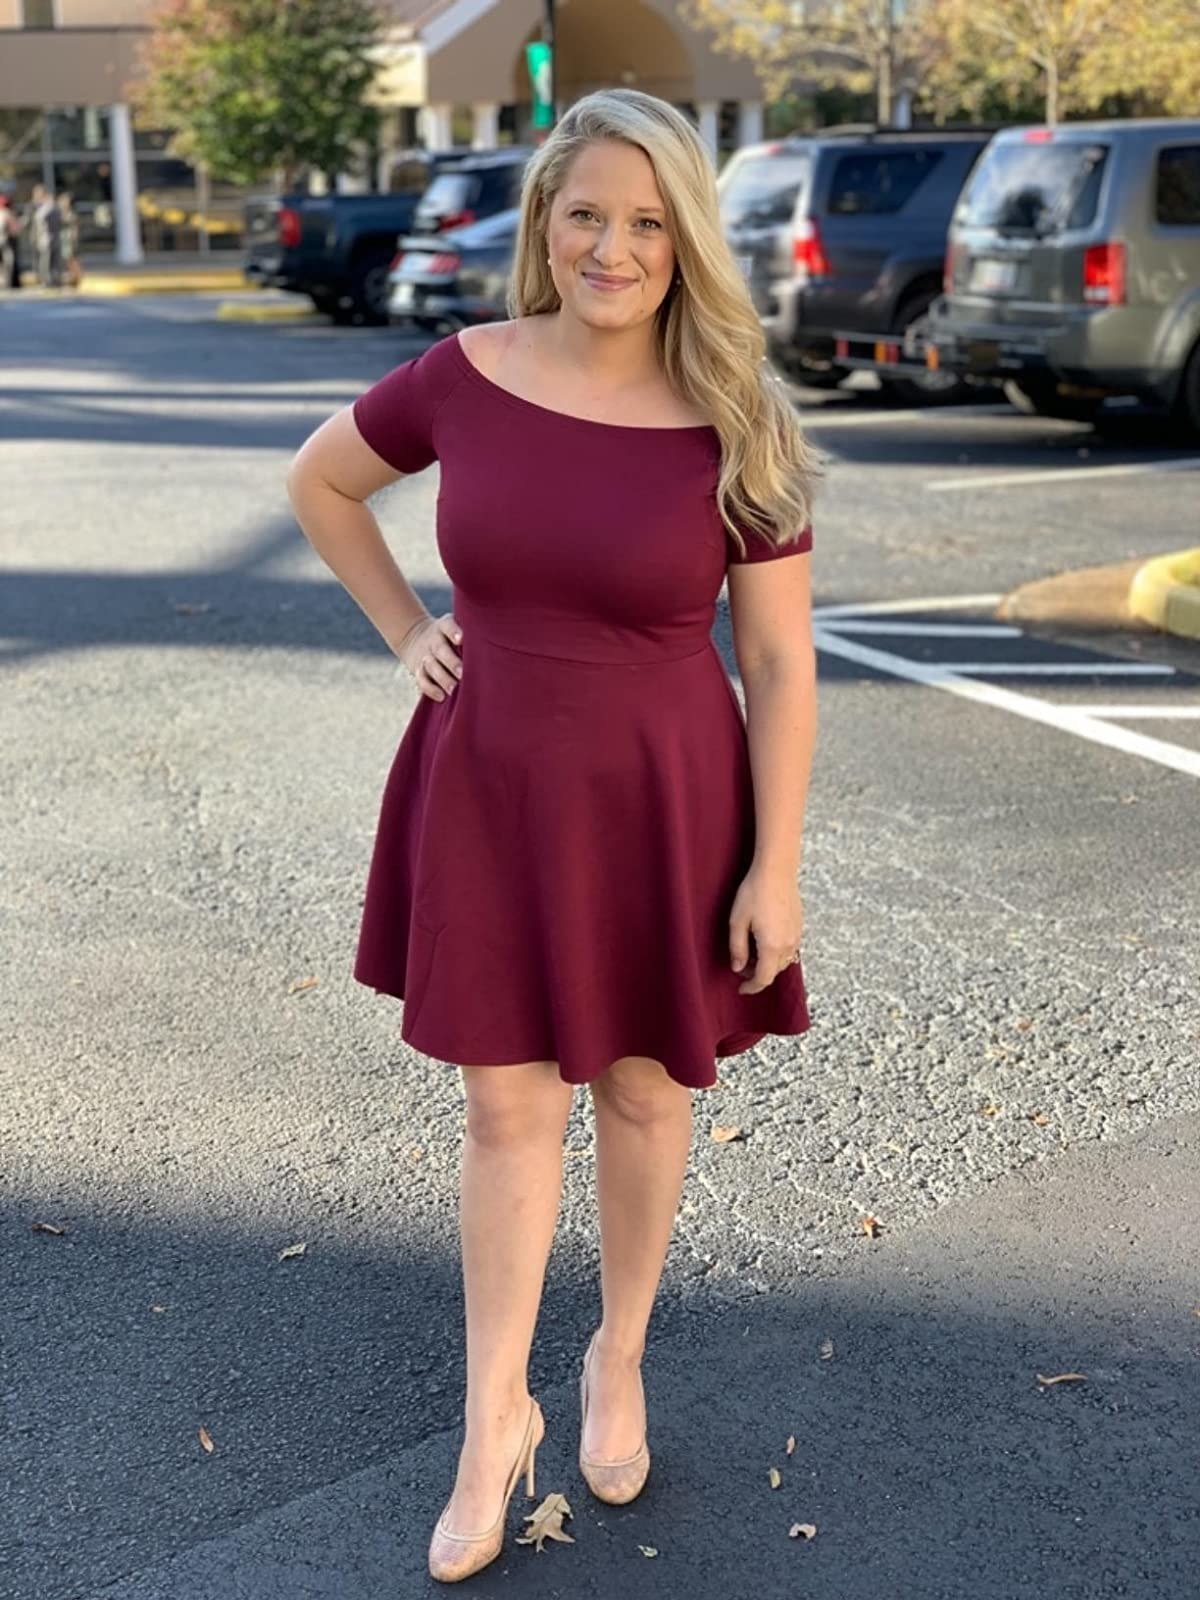 The dress in maroon